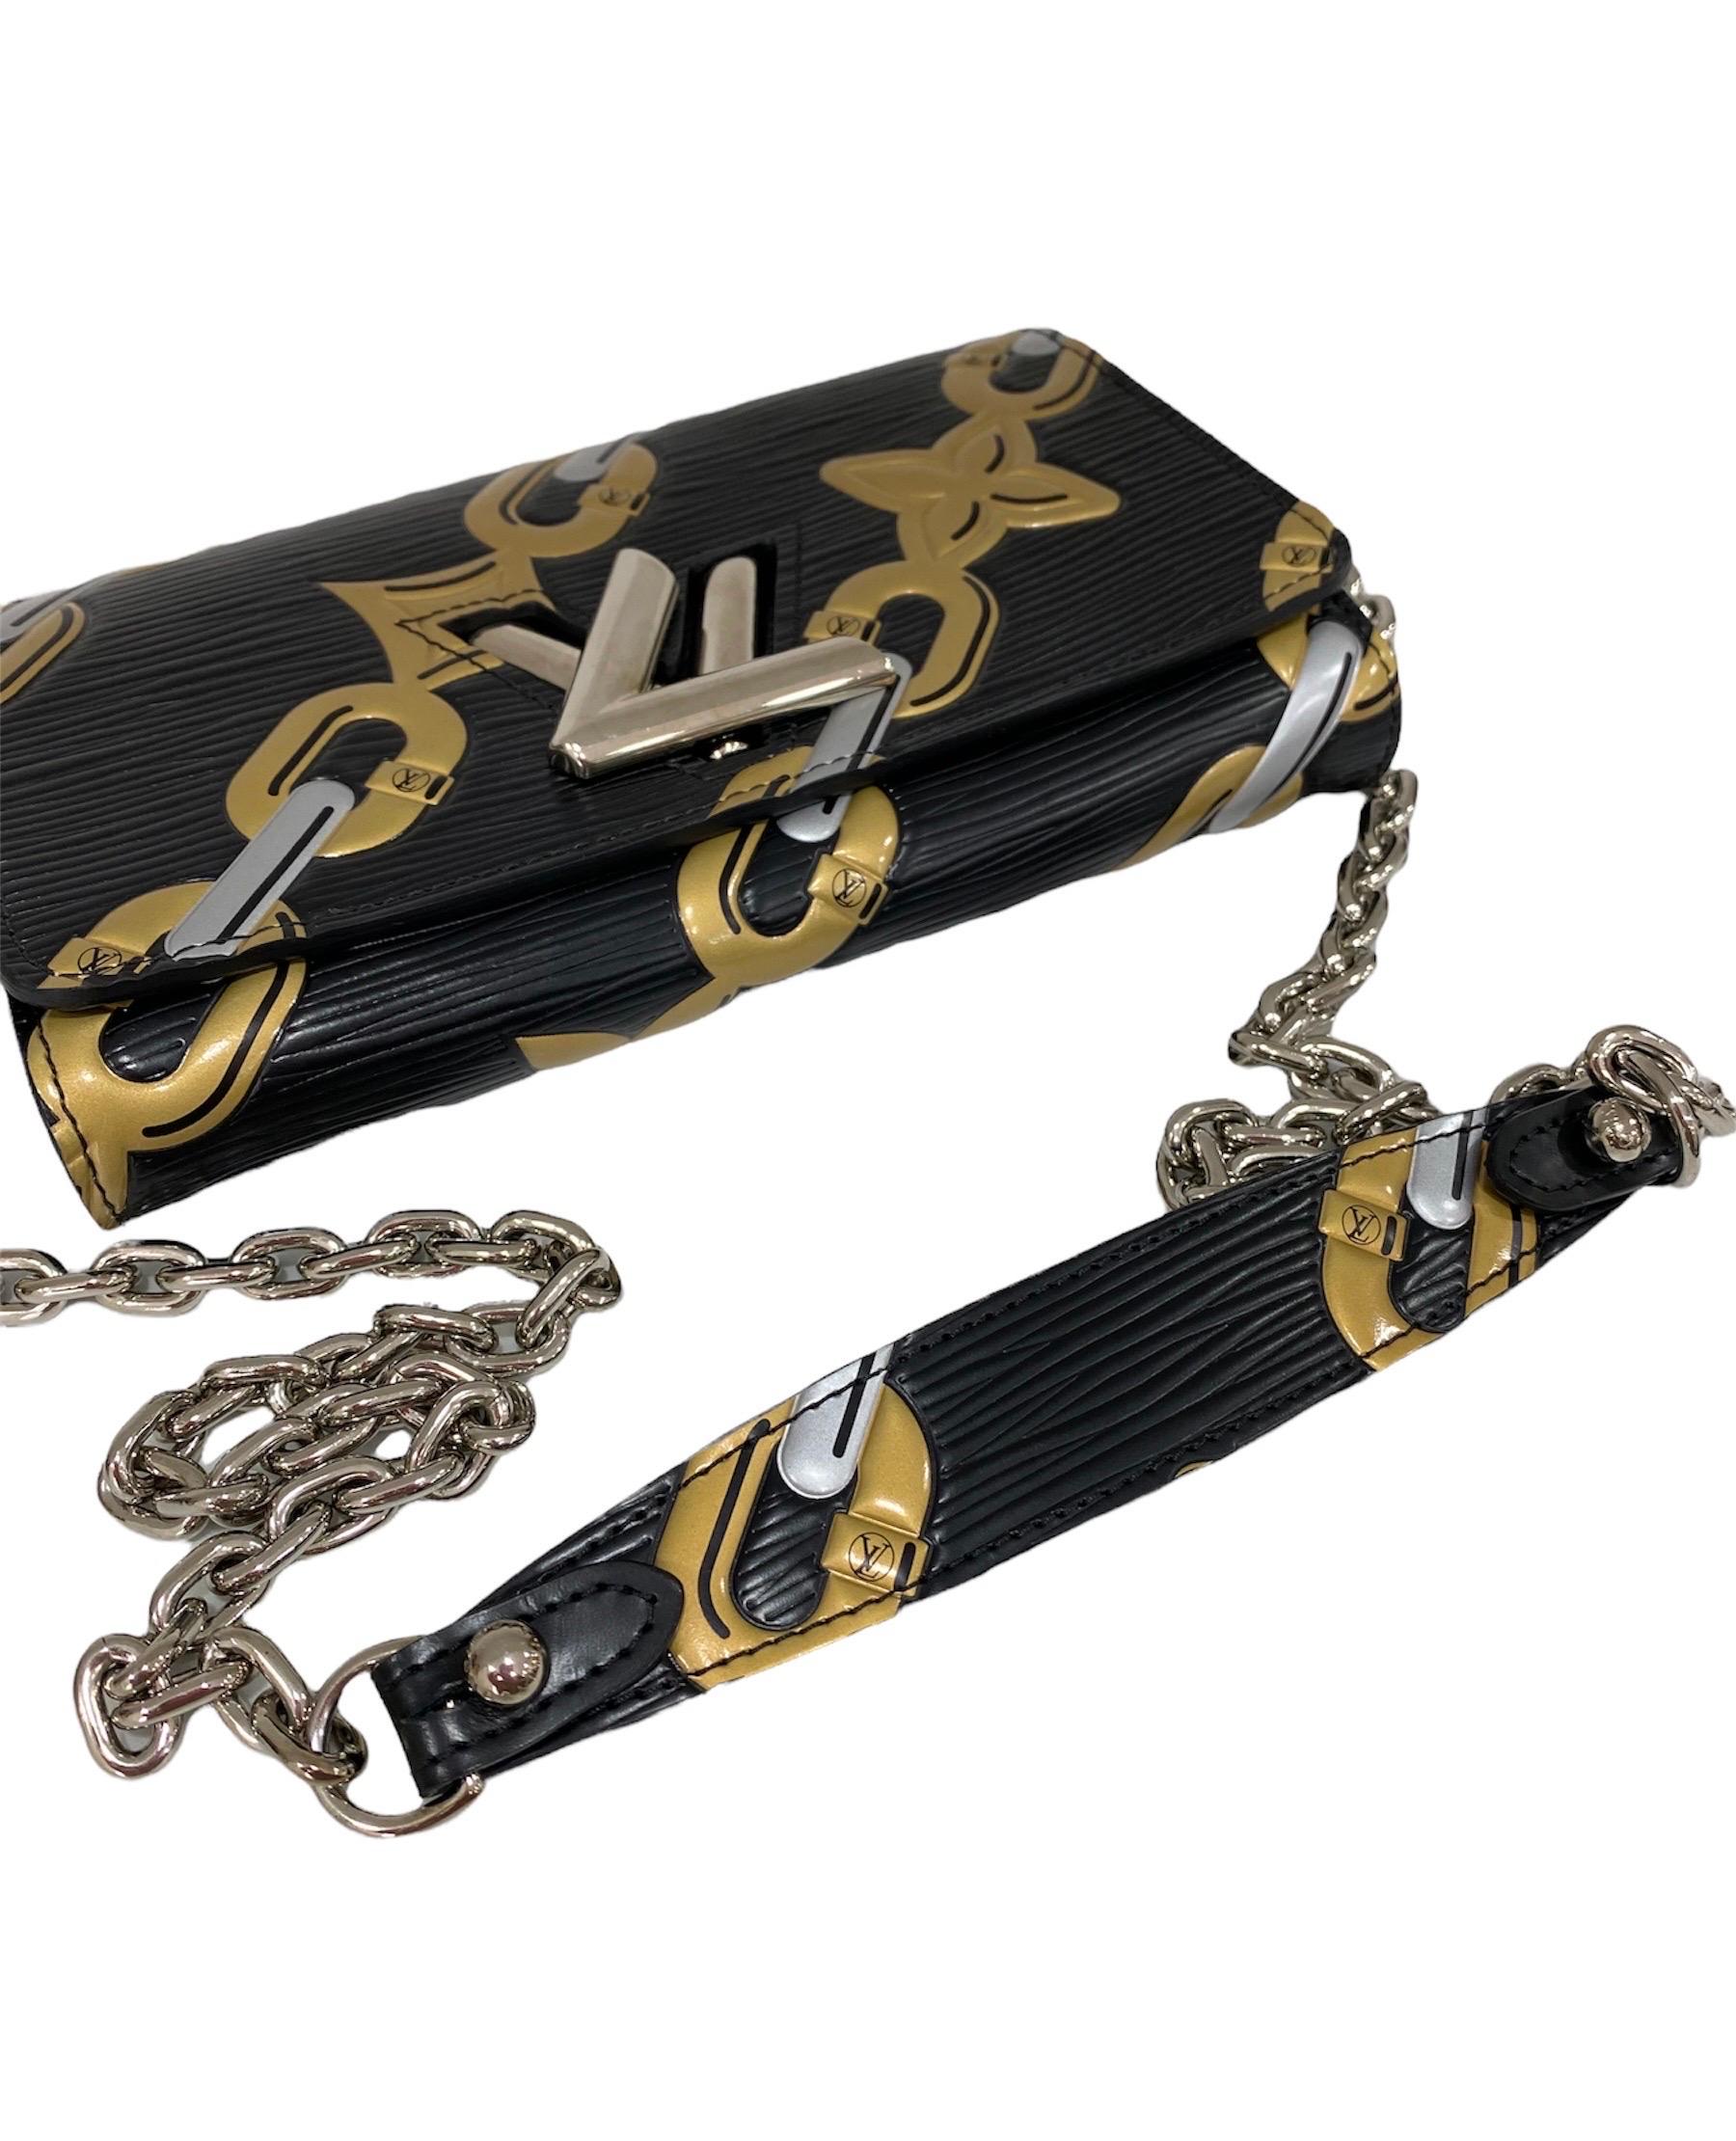 Louis Vuitton Twist Wallet Chain Black In Excellent Condition For Sale In Torre Del Greco, IT